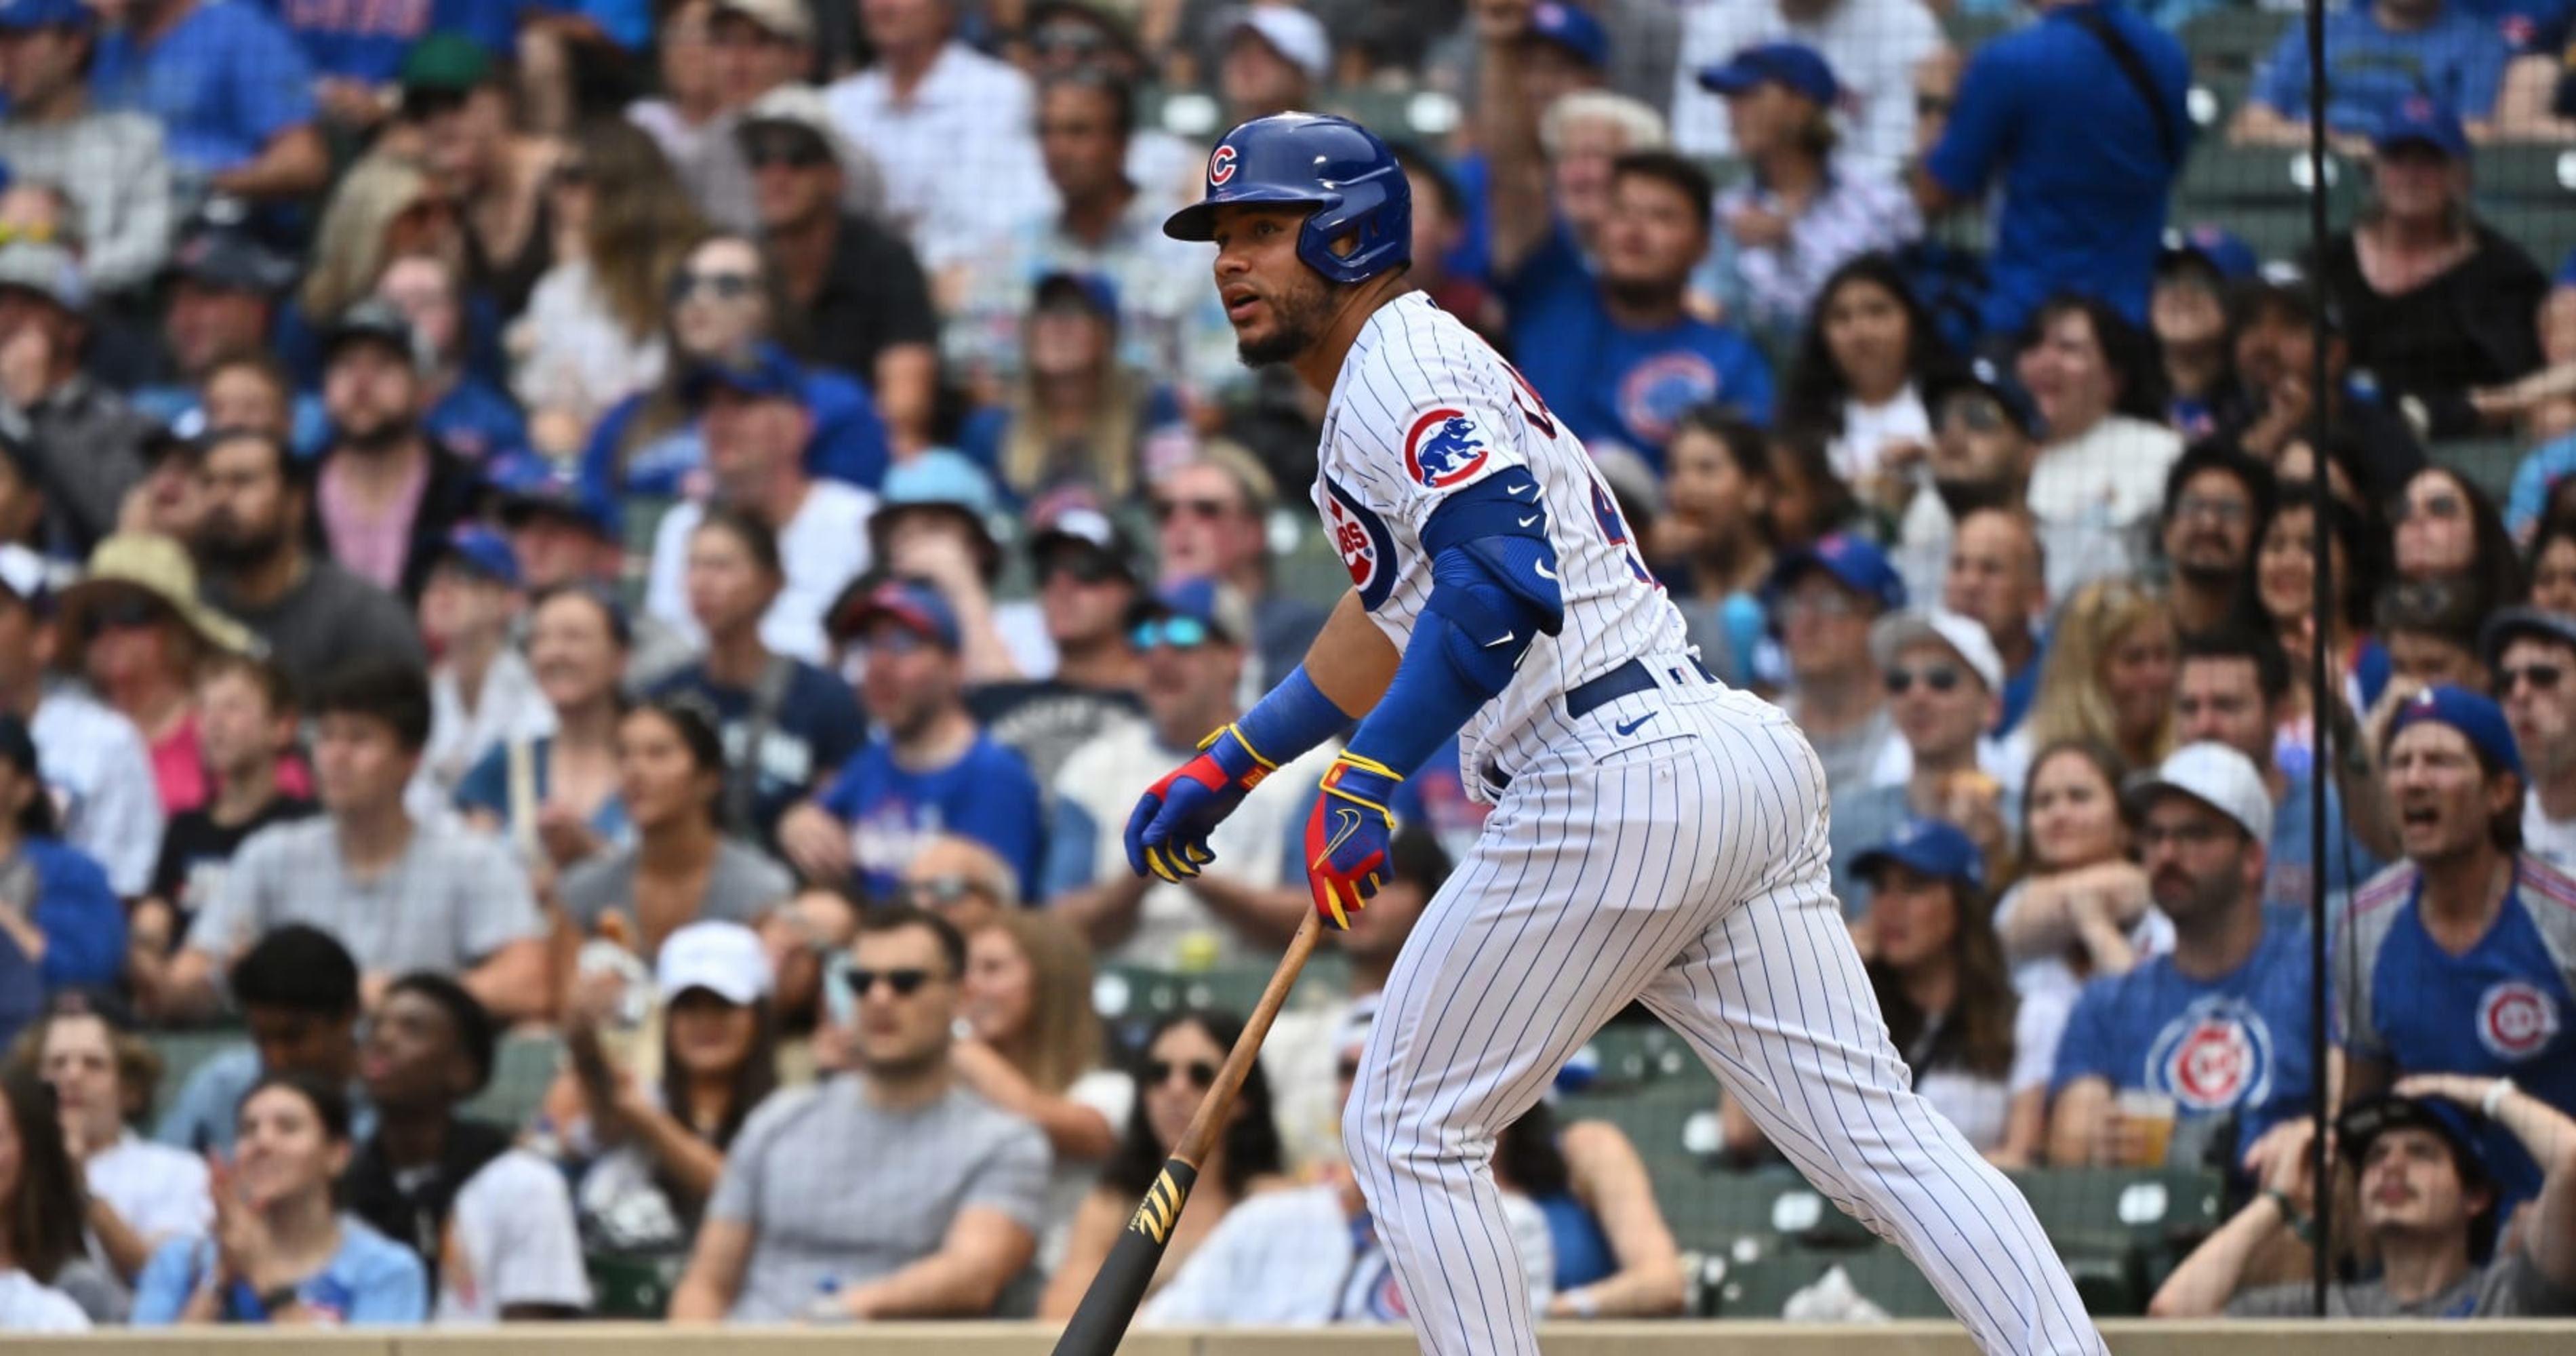 Willson Contreras to Get Qualifying Contract Offer From Cubs, GM Jed Hoyer Says